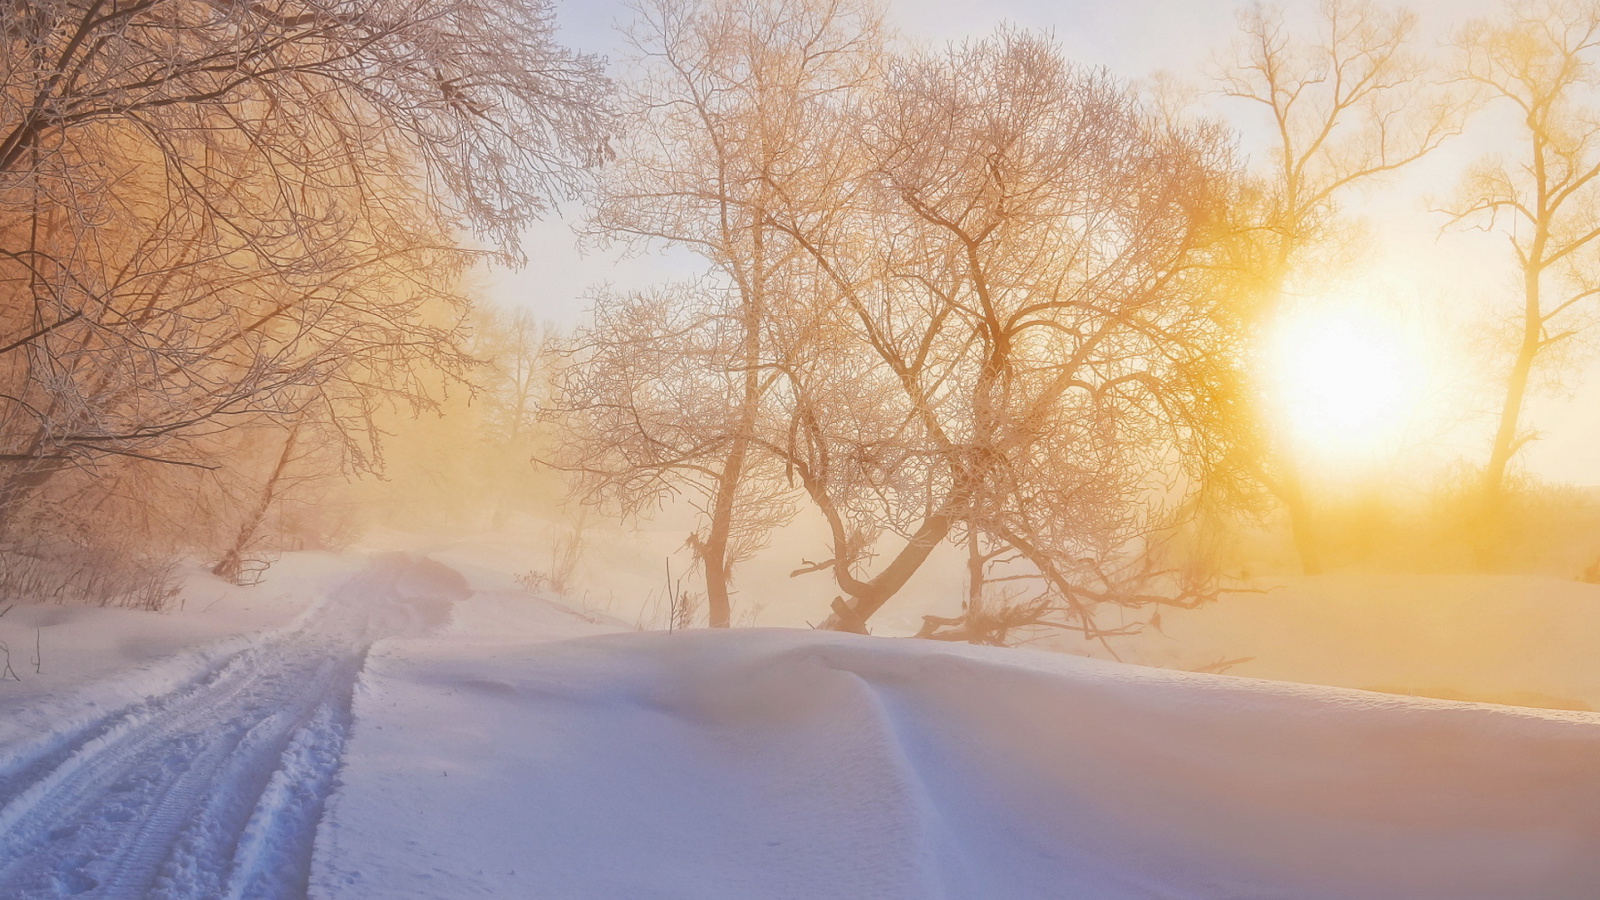 Morning in winter forest screenshot #1 1600x900